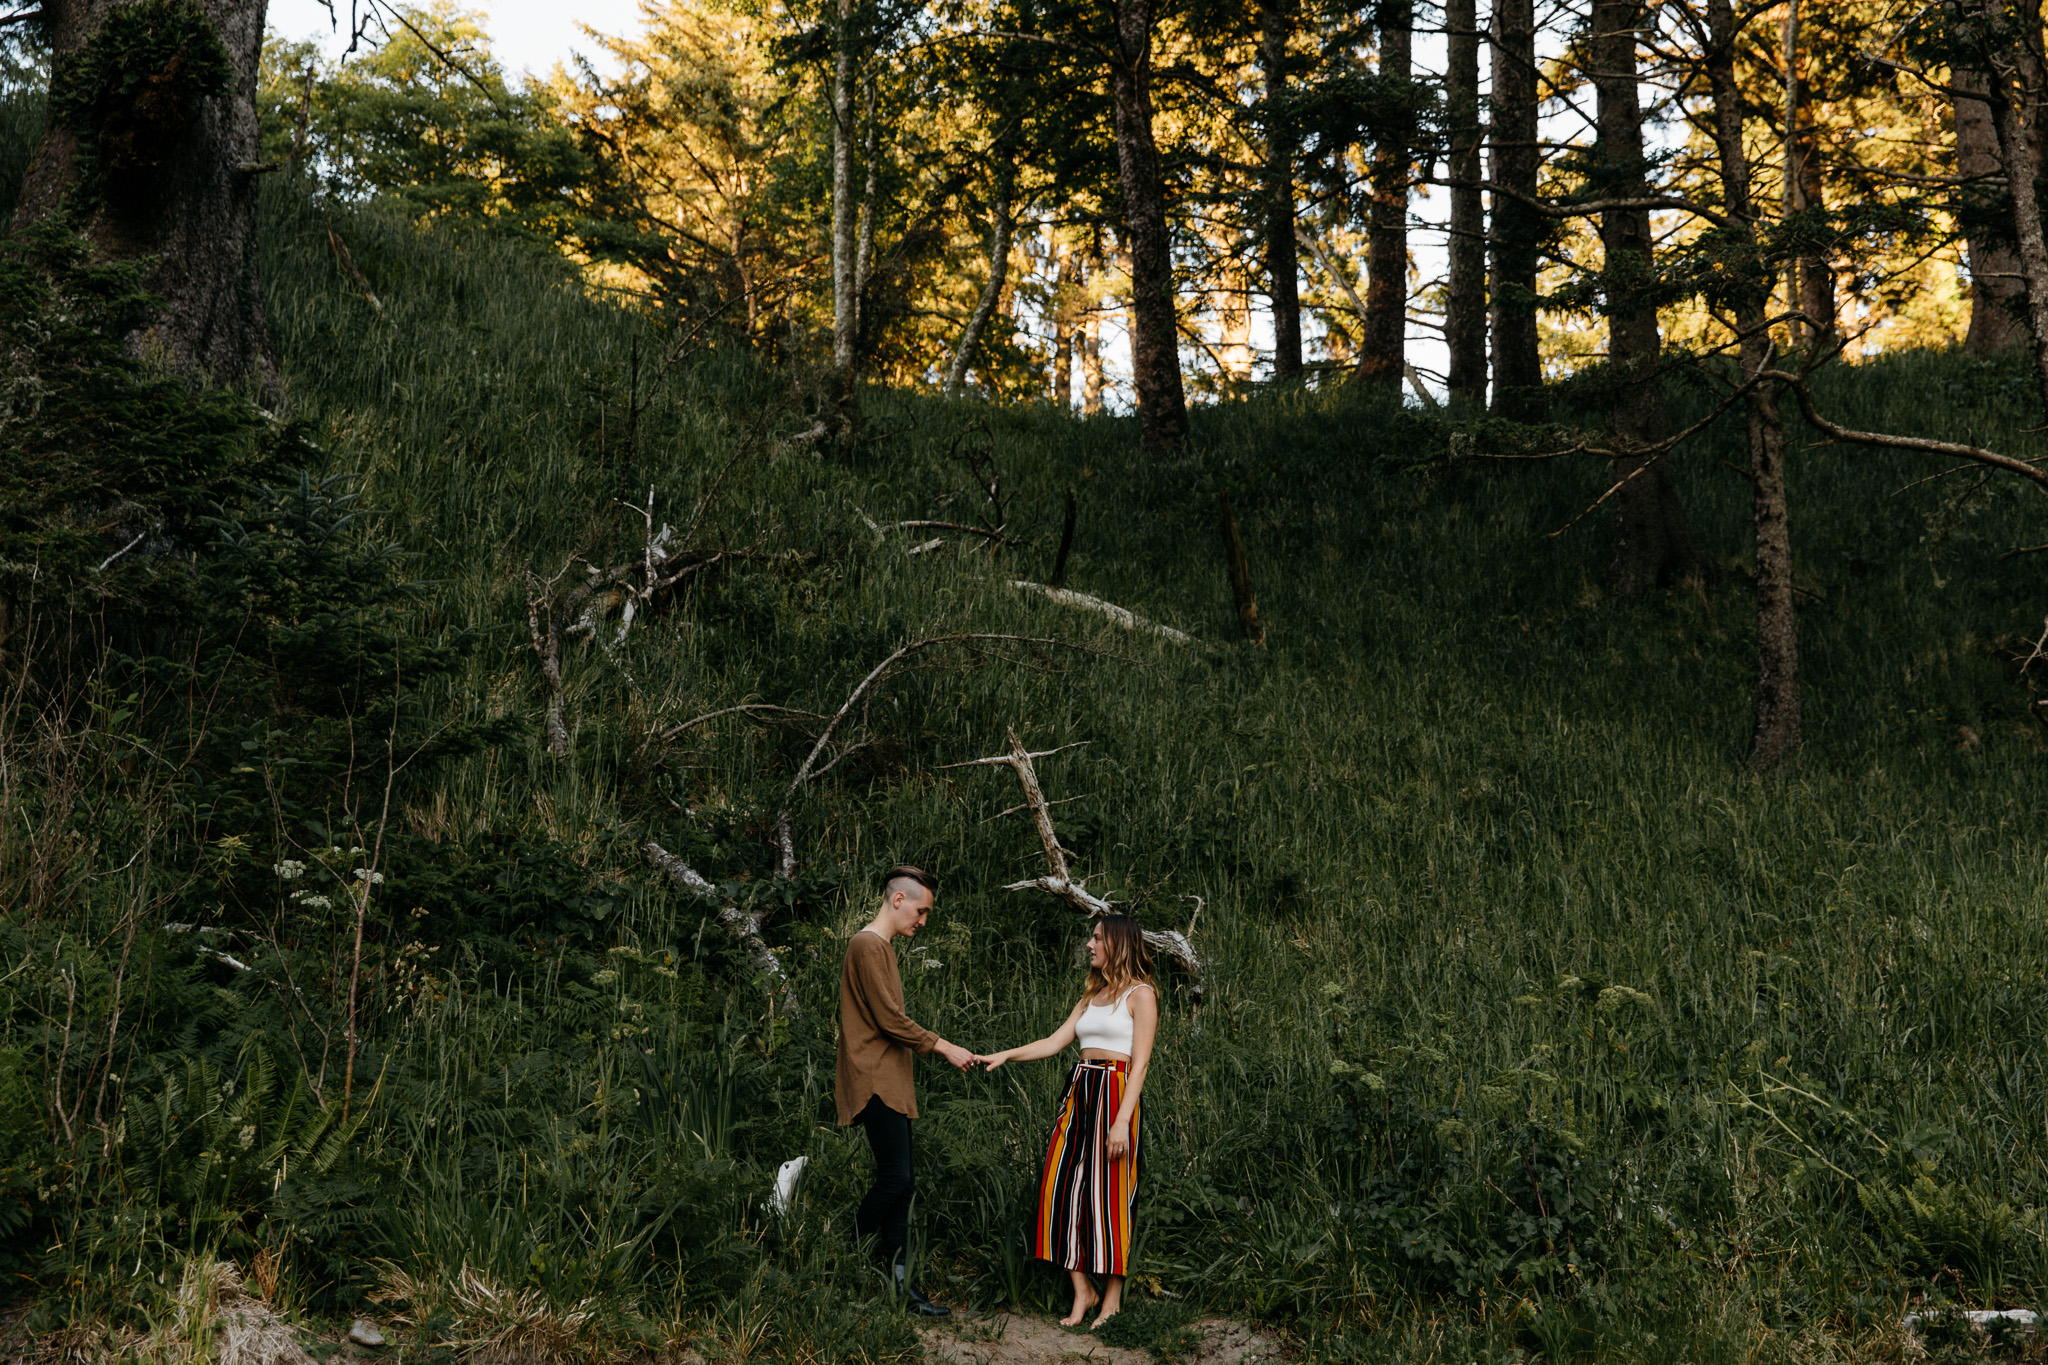 Engagement Session at Cape Disappointment Brittney Hyatt Photography